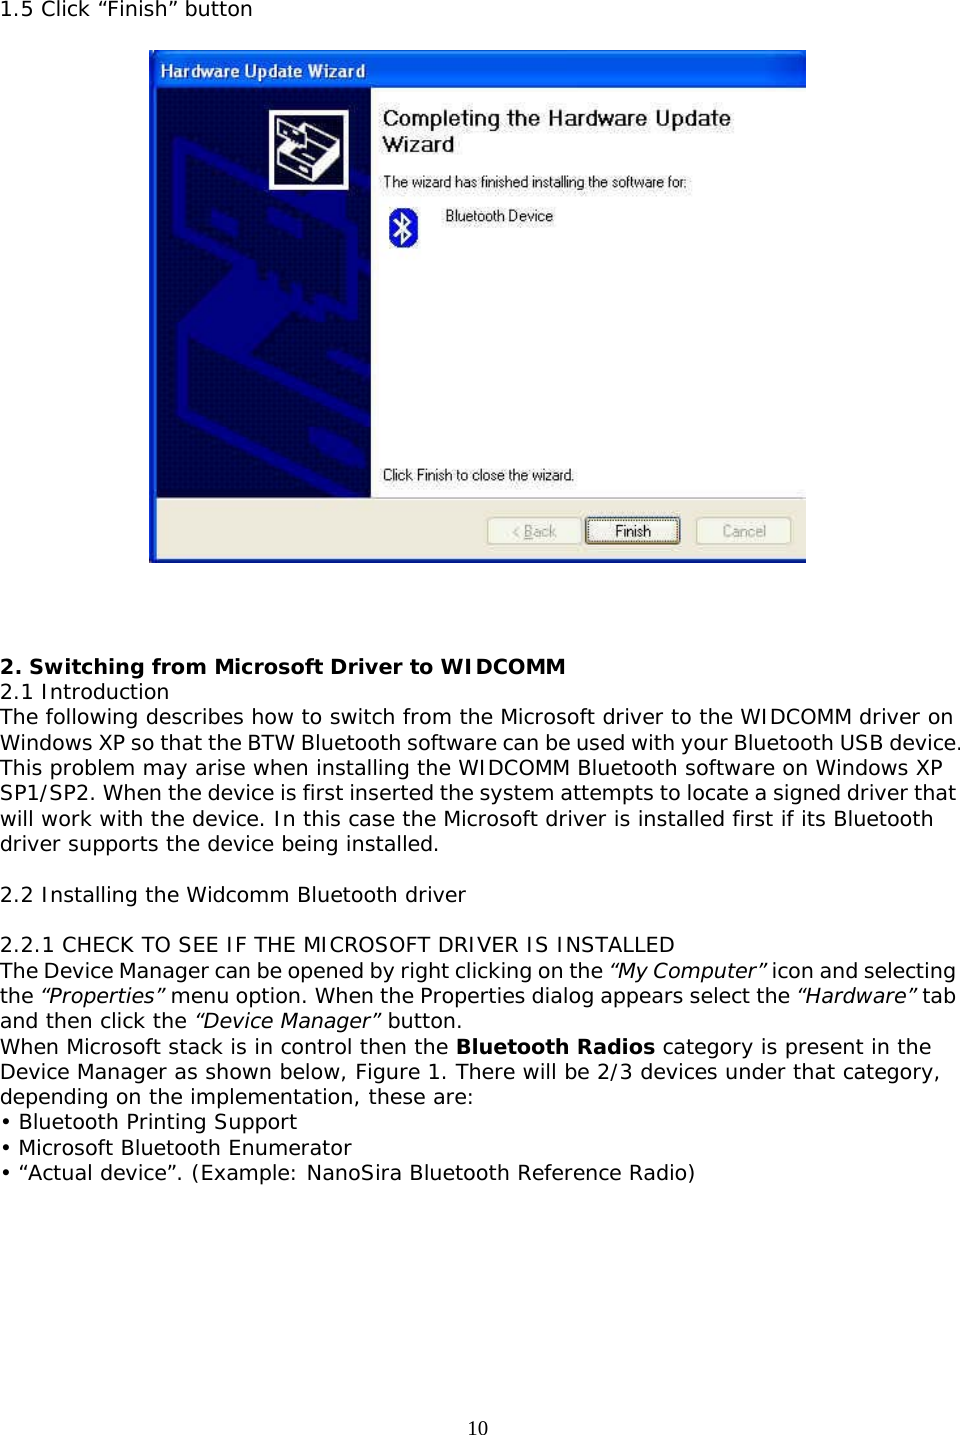 10 1.5 Click “Finish” button      2. Switching from Microsoft Driver to WIDCOMM 2.1 Introduction The following describes how to switch from the Microsoft driver to the WIDCOMM driver on Windows XP so that the BTW Bluetooth software can be used with your Bluetooth USB device. This problem may arise when installing the WIDCOMM Bluetooth software on Windows XP SP1/SP2. When the device is first inserted the system attempts to locate a signed driver that will work with the device. In this case the Microsoft driver is installed first if its Bluetooth driver supports the device being installed.  2.2 Installing the Widcomm Bluetooth driver  2.2.1 CHECK TO SEE IF THE MICROSOFT DRIVER IS INSTALLED The Device Manager can be opened by right clicking on the “My Computer” icon and selecting the “Properties” menu option. When the Properties dialog appears select the “Hardware” tab and then click the “Device Manager” button. When Microsoft stack is in control then the Bluetooth Radios category is present in the Device Manager as shown below, Figure 1. There will be 2/3 devices under that category, depending on the implementation, these are: • Bluetooth Printing Support • Microsoft Bluetooth Enumerator • “Actual device”. (Example: NanoSira Bluetooth Reference Radio)  